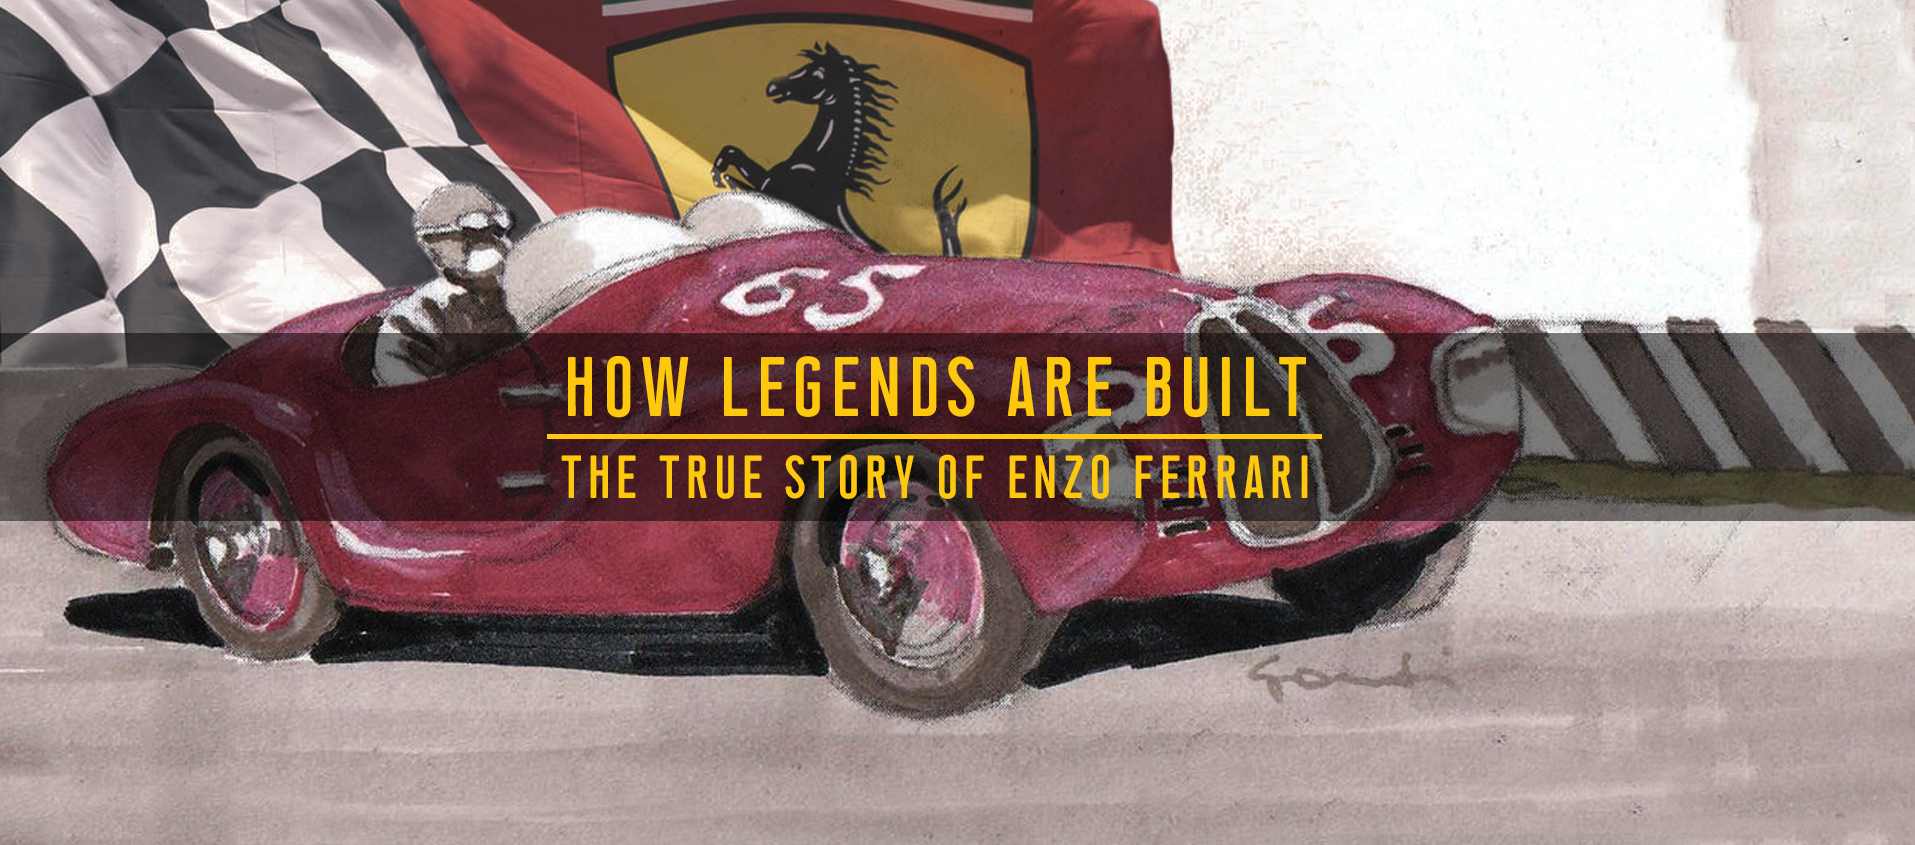 How legends are built: the true story of Enzo Ferrari image